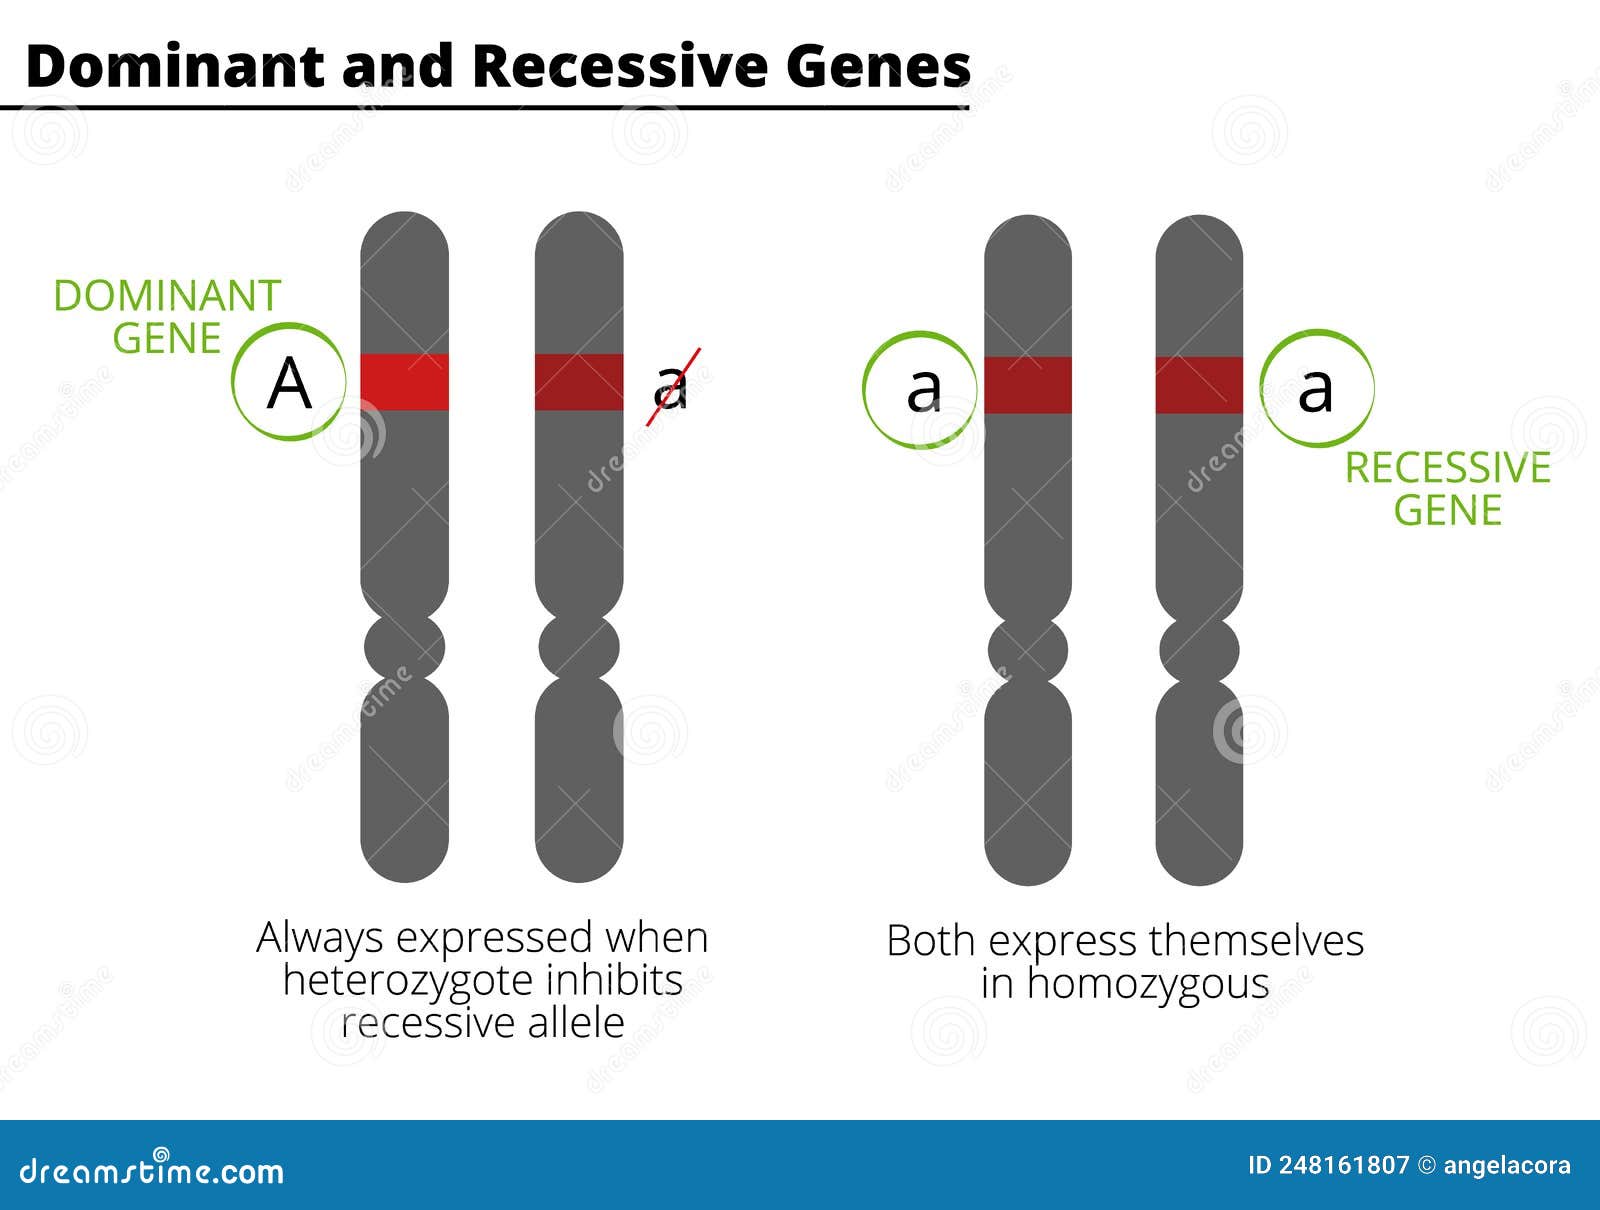 difference between dominant and recessive genes